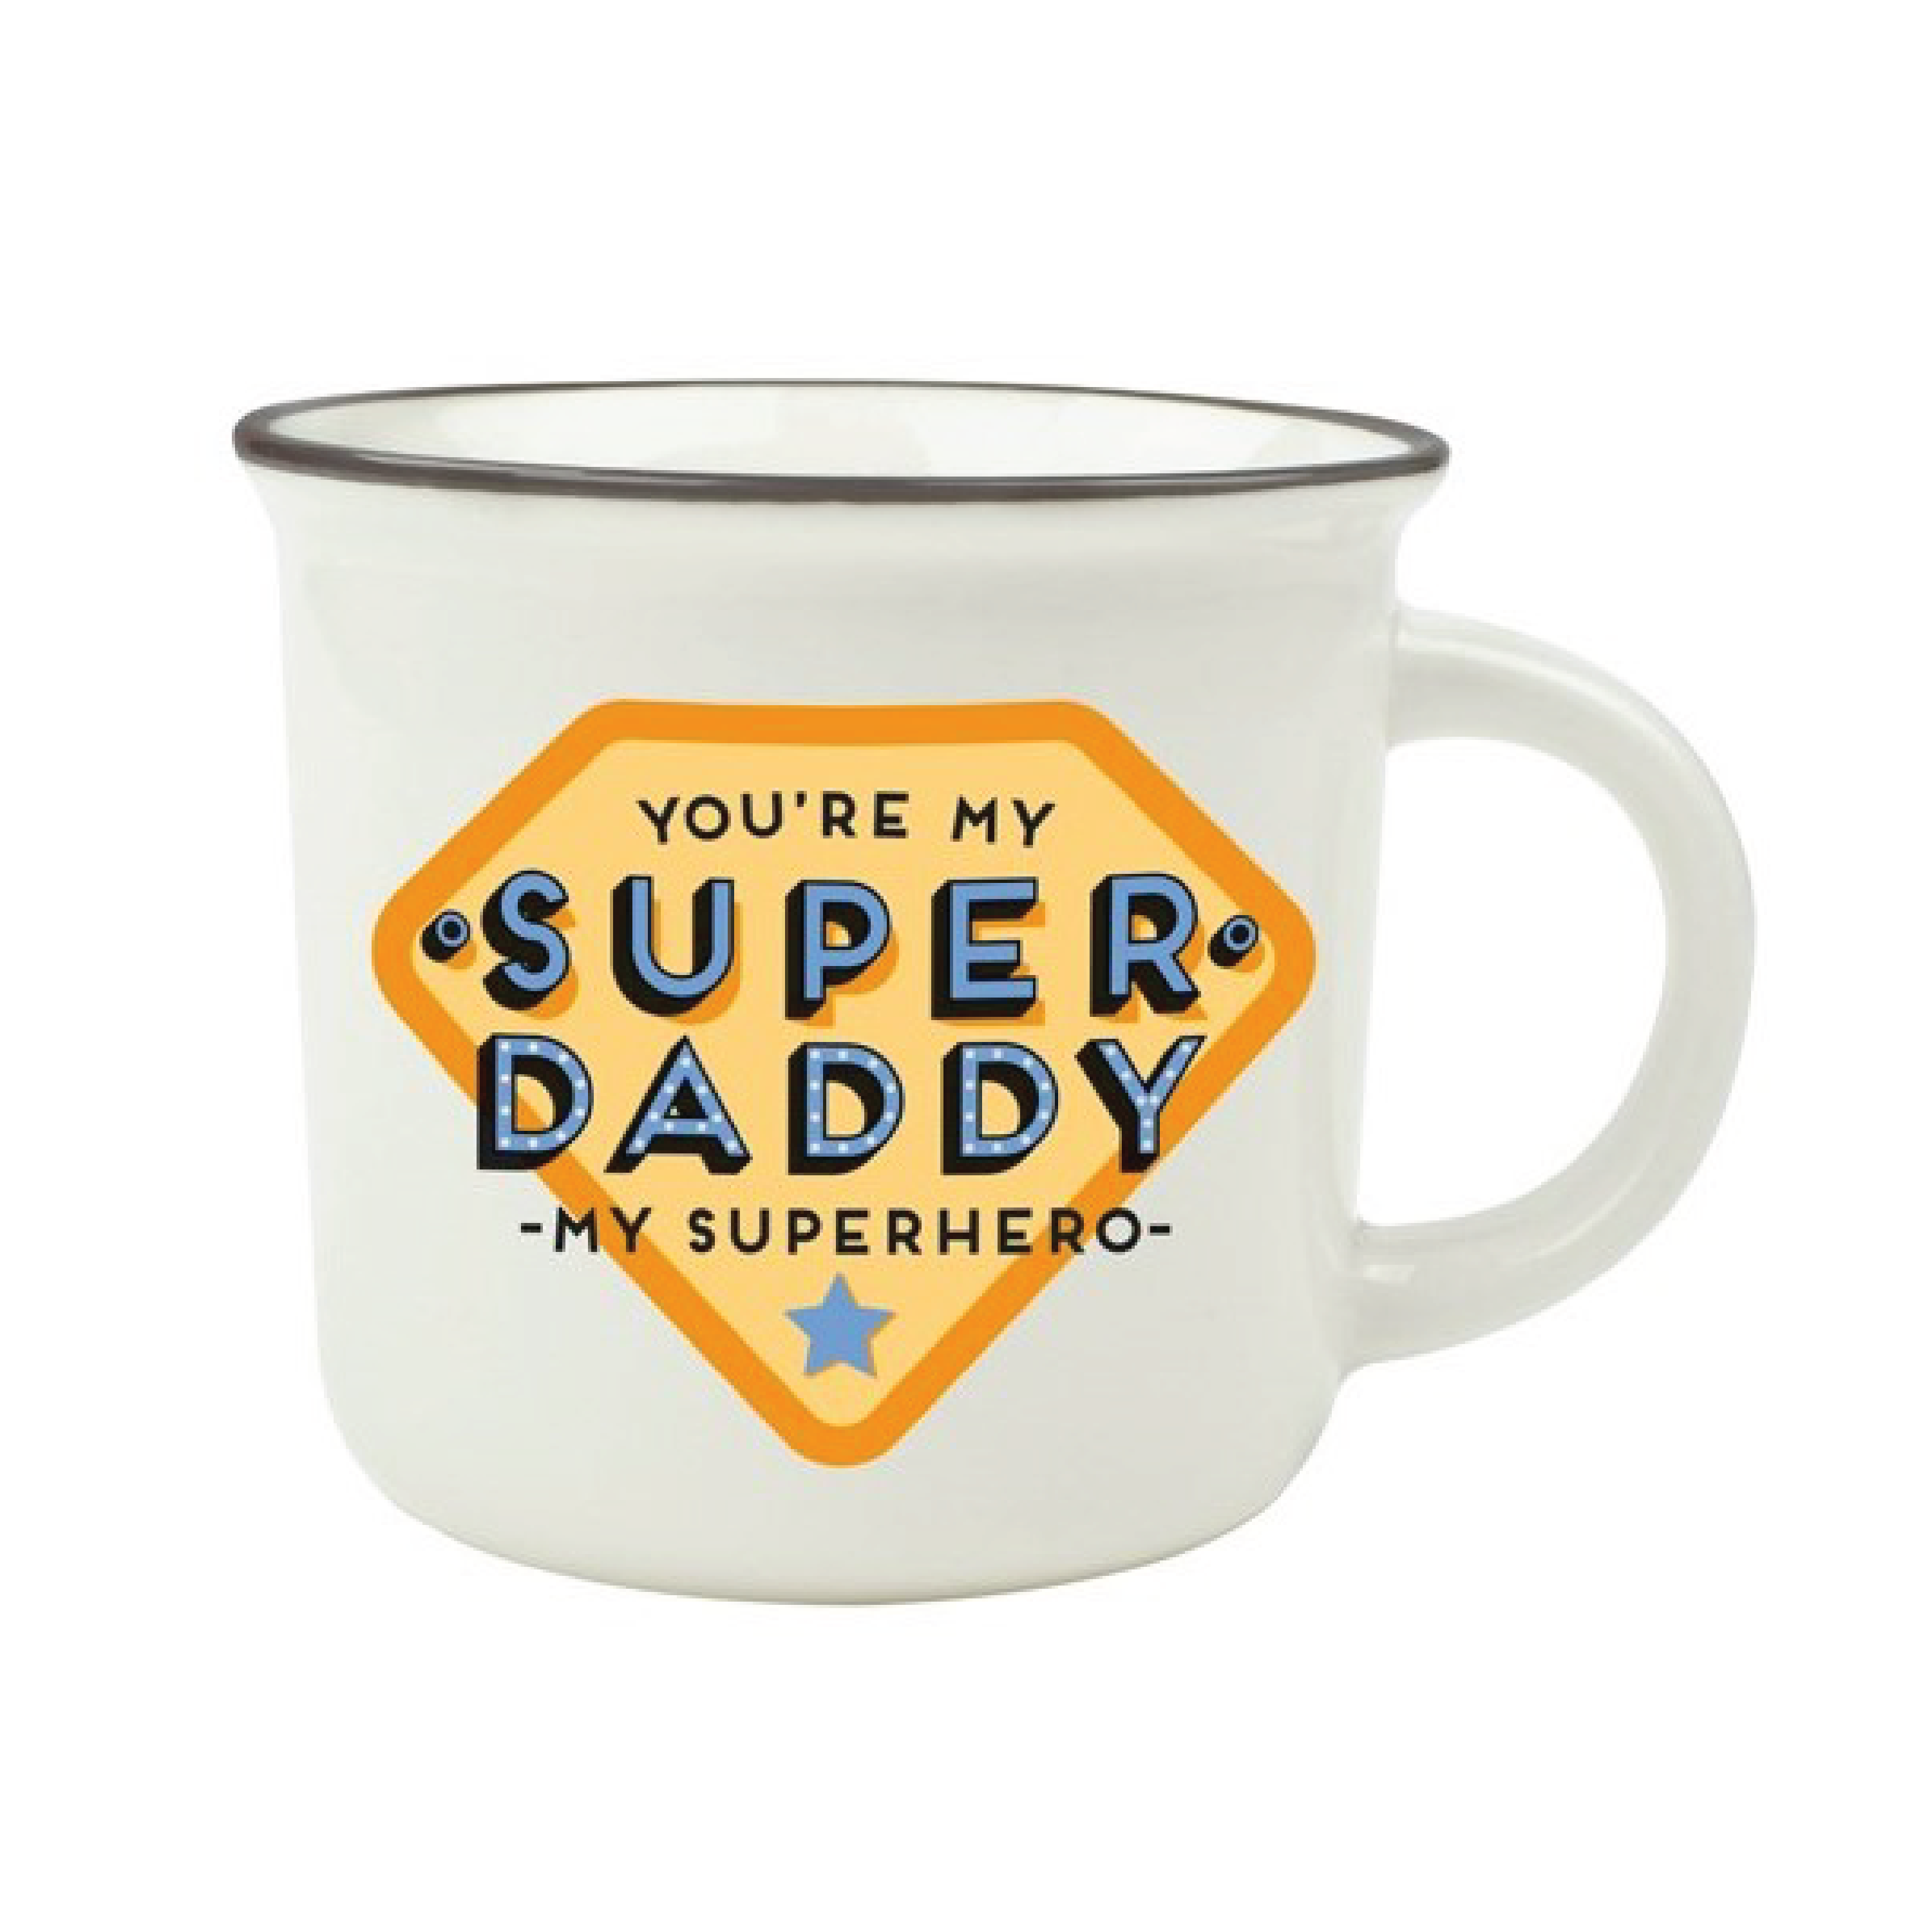 Super Daddy Cup-puccino krus, 350 ml